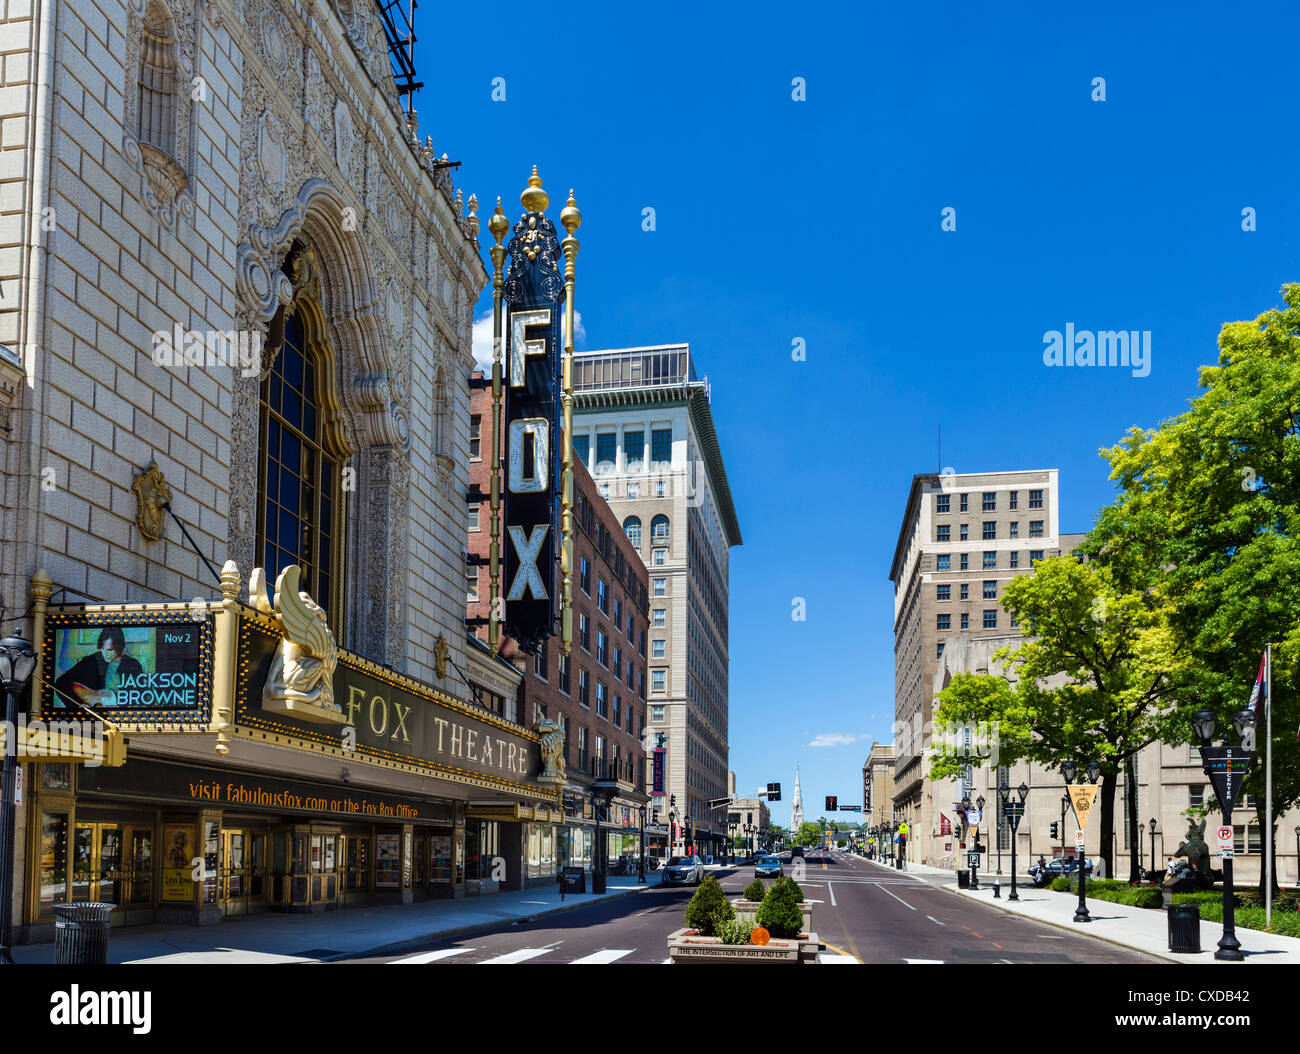 The Fox Theatre on Grand Boulevard in the Grand Center arts district of midtown St Louis, Missouri, USA Stock Photo